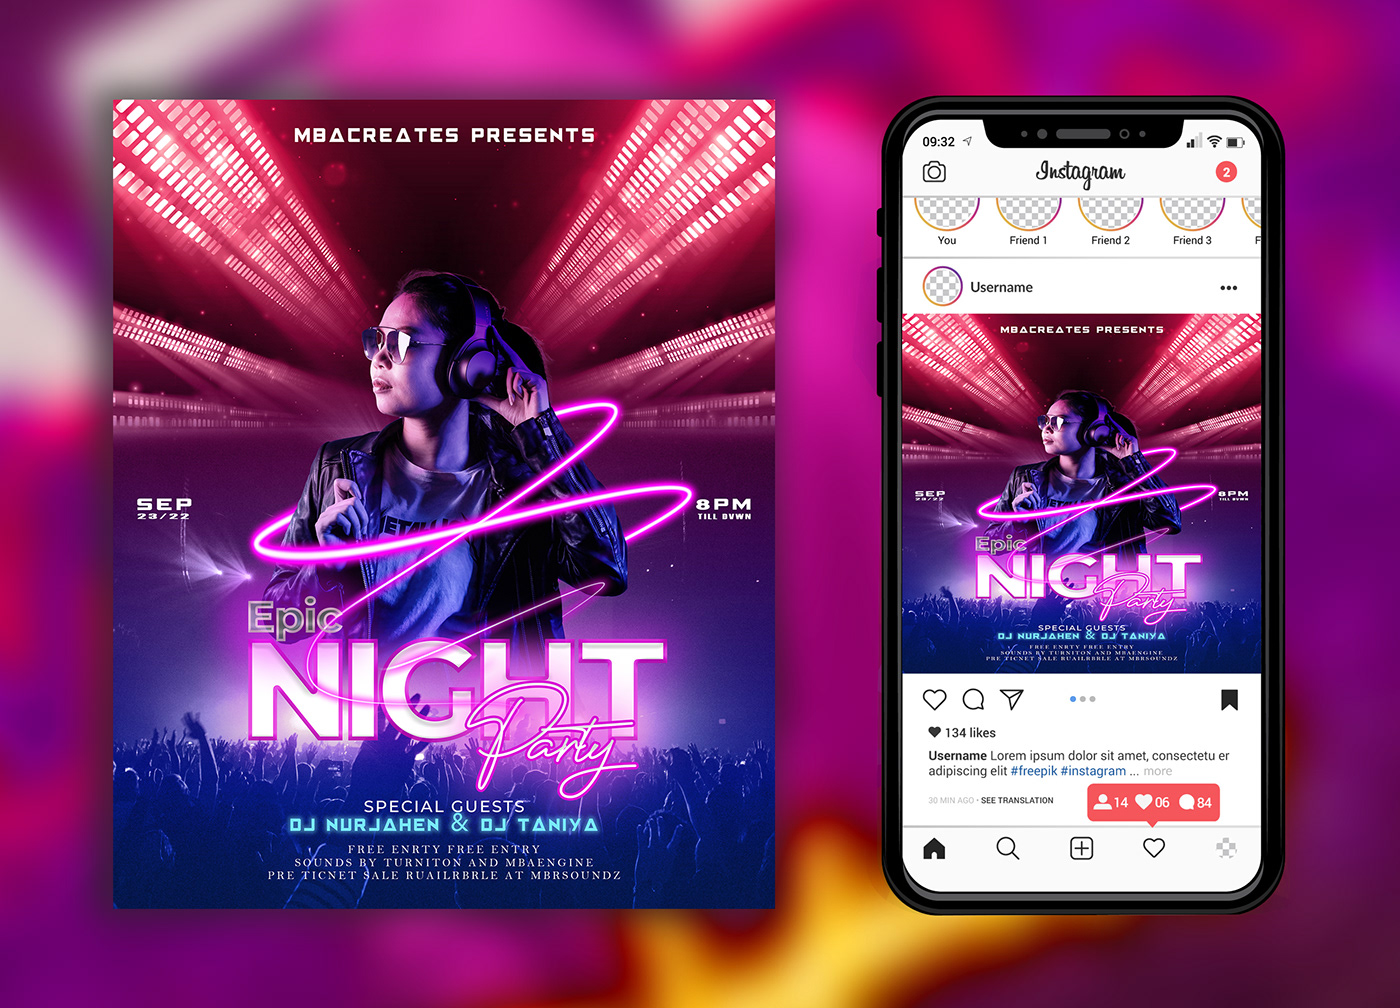 this is a new modern event dj night party flyer design